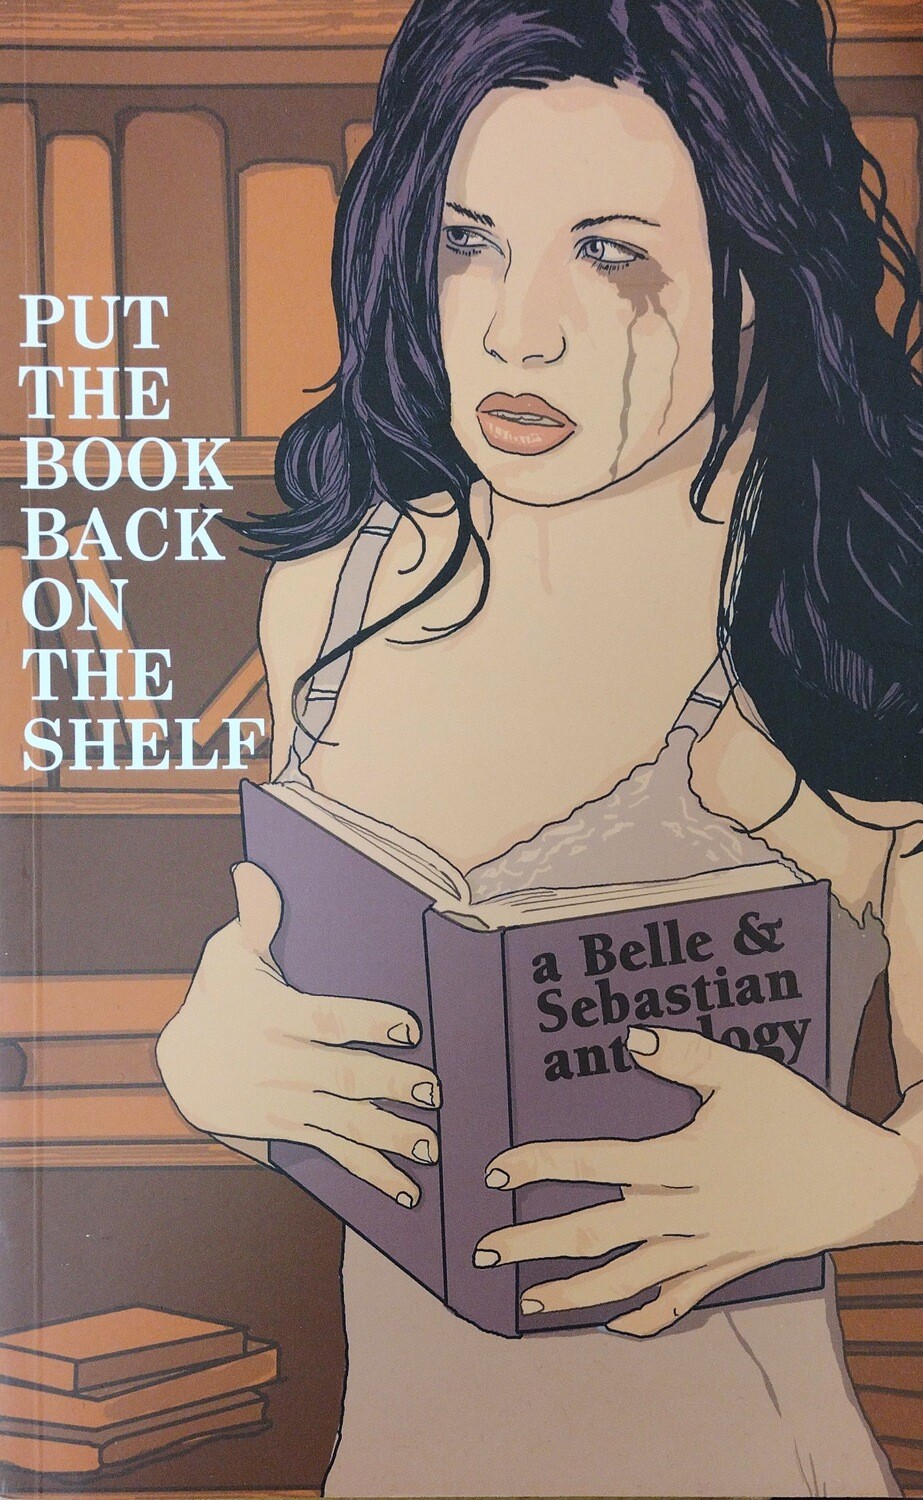 Put The Book Back on the Shelf: A Belle and Sebastian Anthology - Book featuring David Lasky